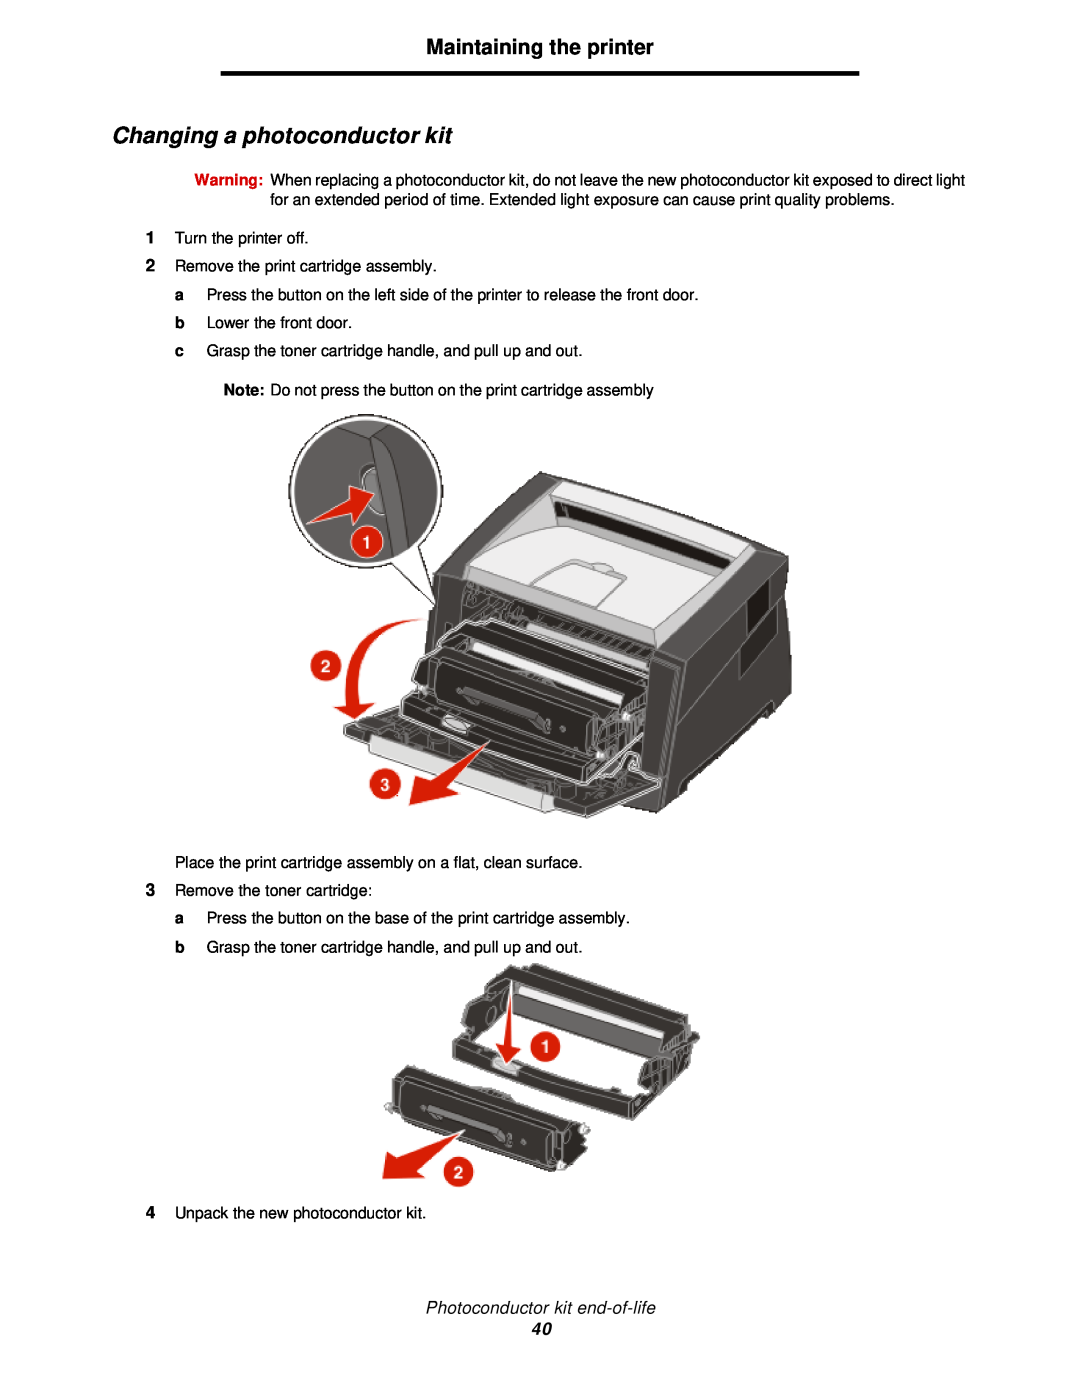 Lexmark 350d manual Changing a photoconductor kit, Maintaining the printer, Photoconductor kit end-of-life 